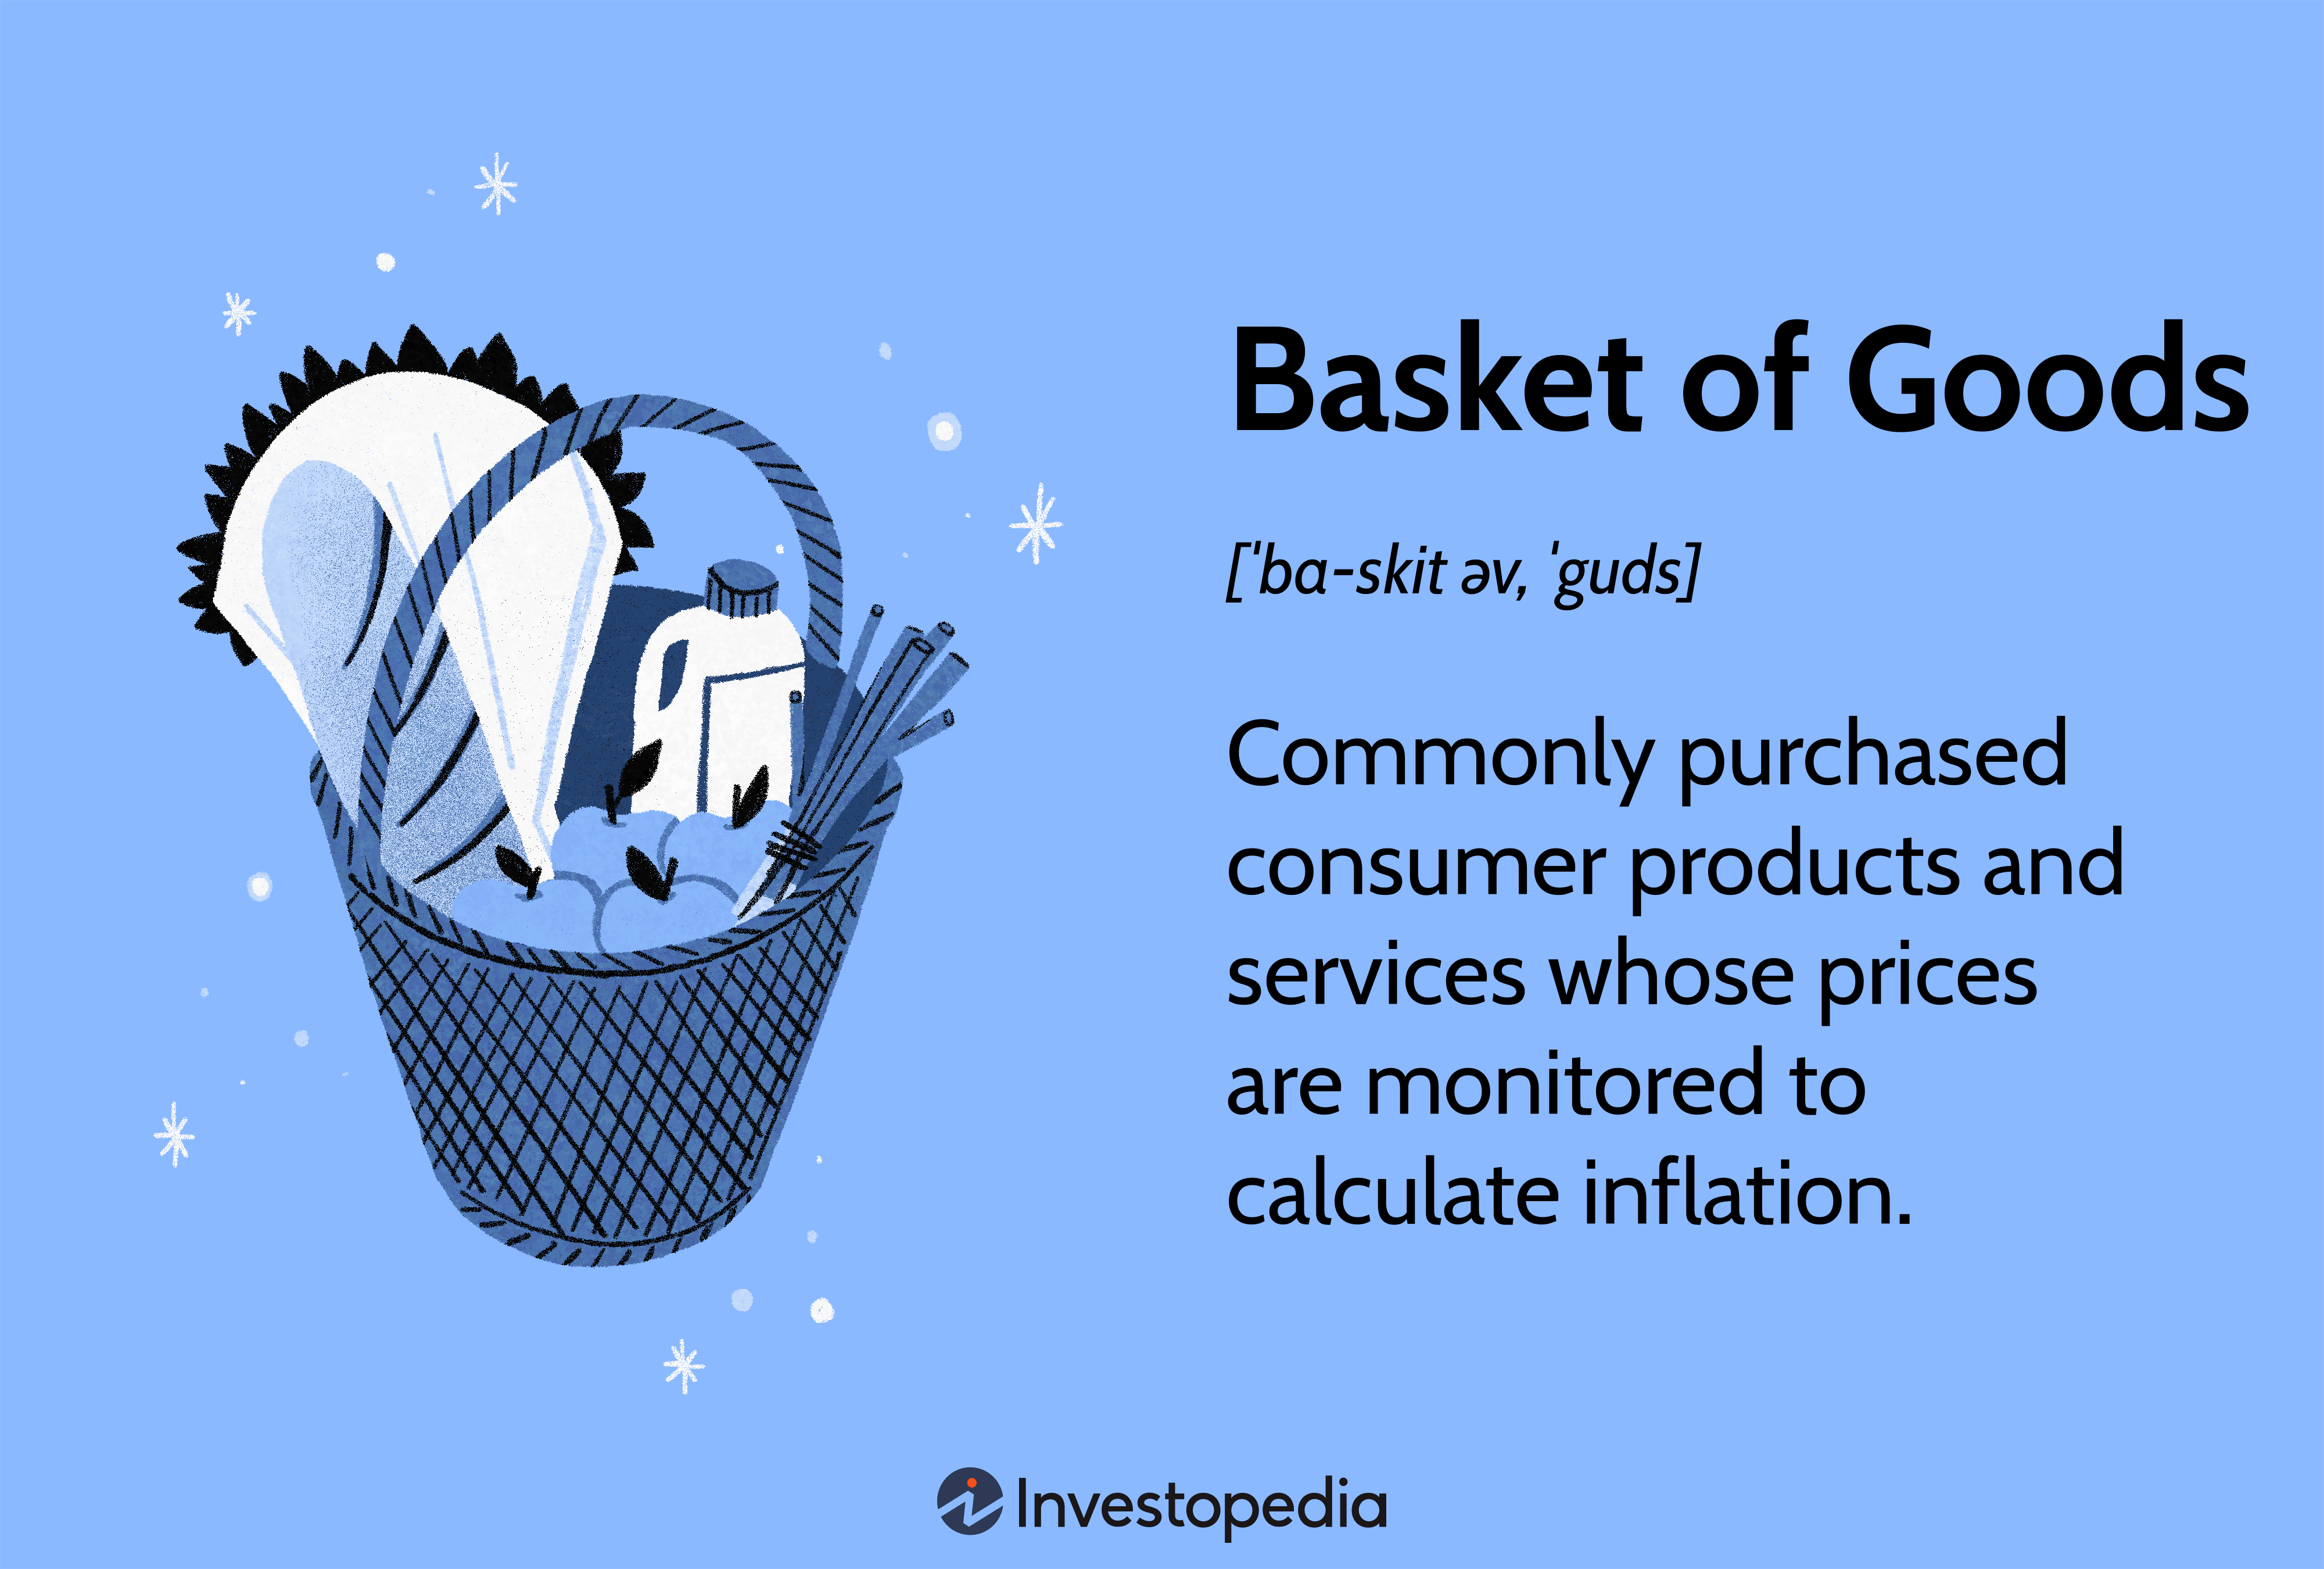 Basket of Goods: Commonly purchased consumer products and services whose prices are monitored to calculate inflation.